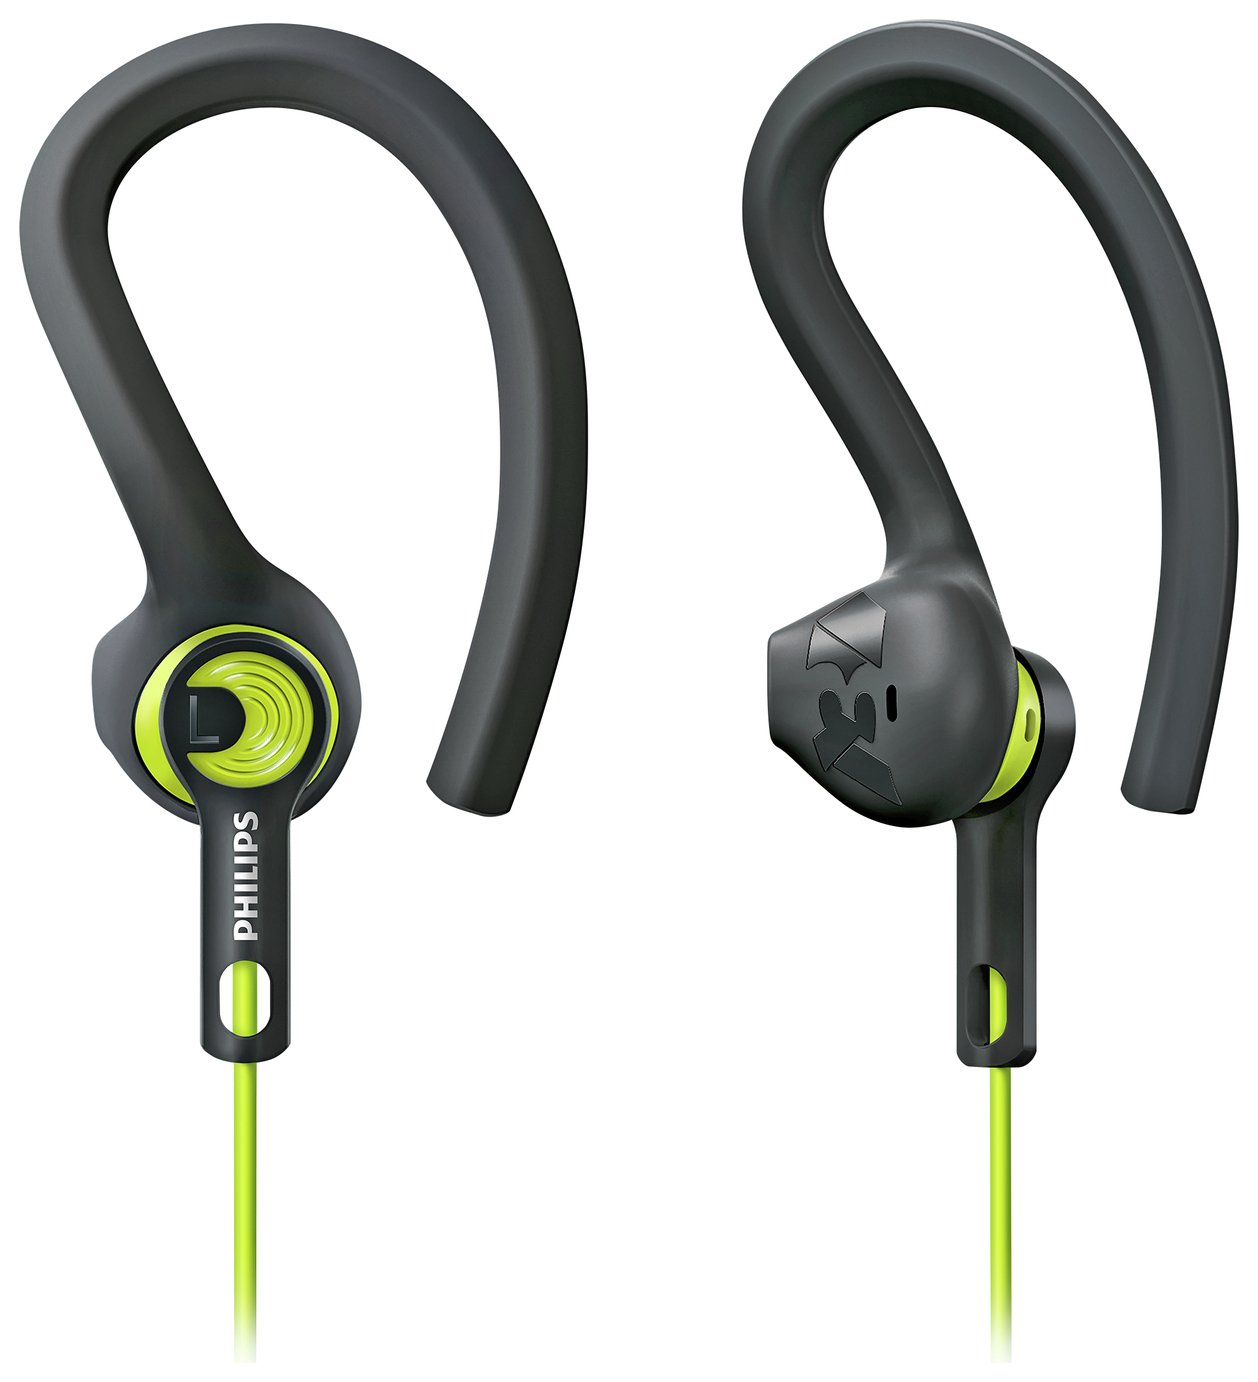 Philips SHQ1400 ActionFit Wired In-Ear Headphones - Green